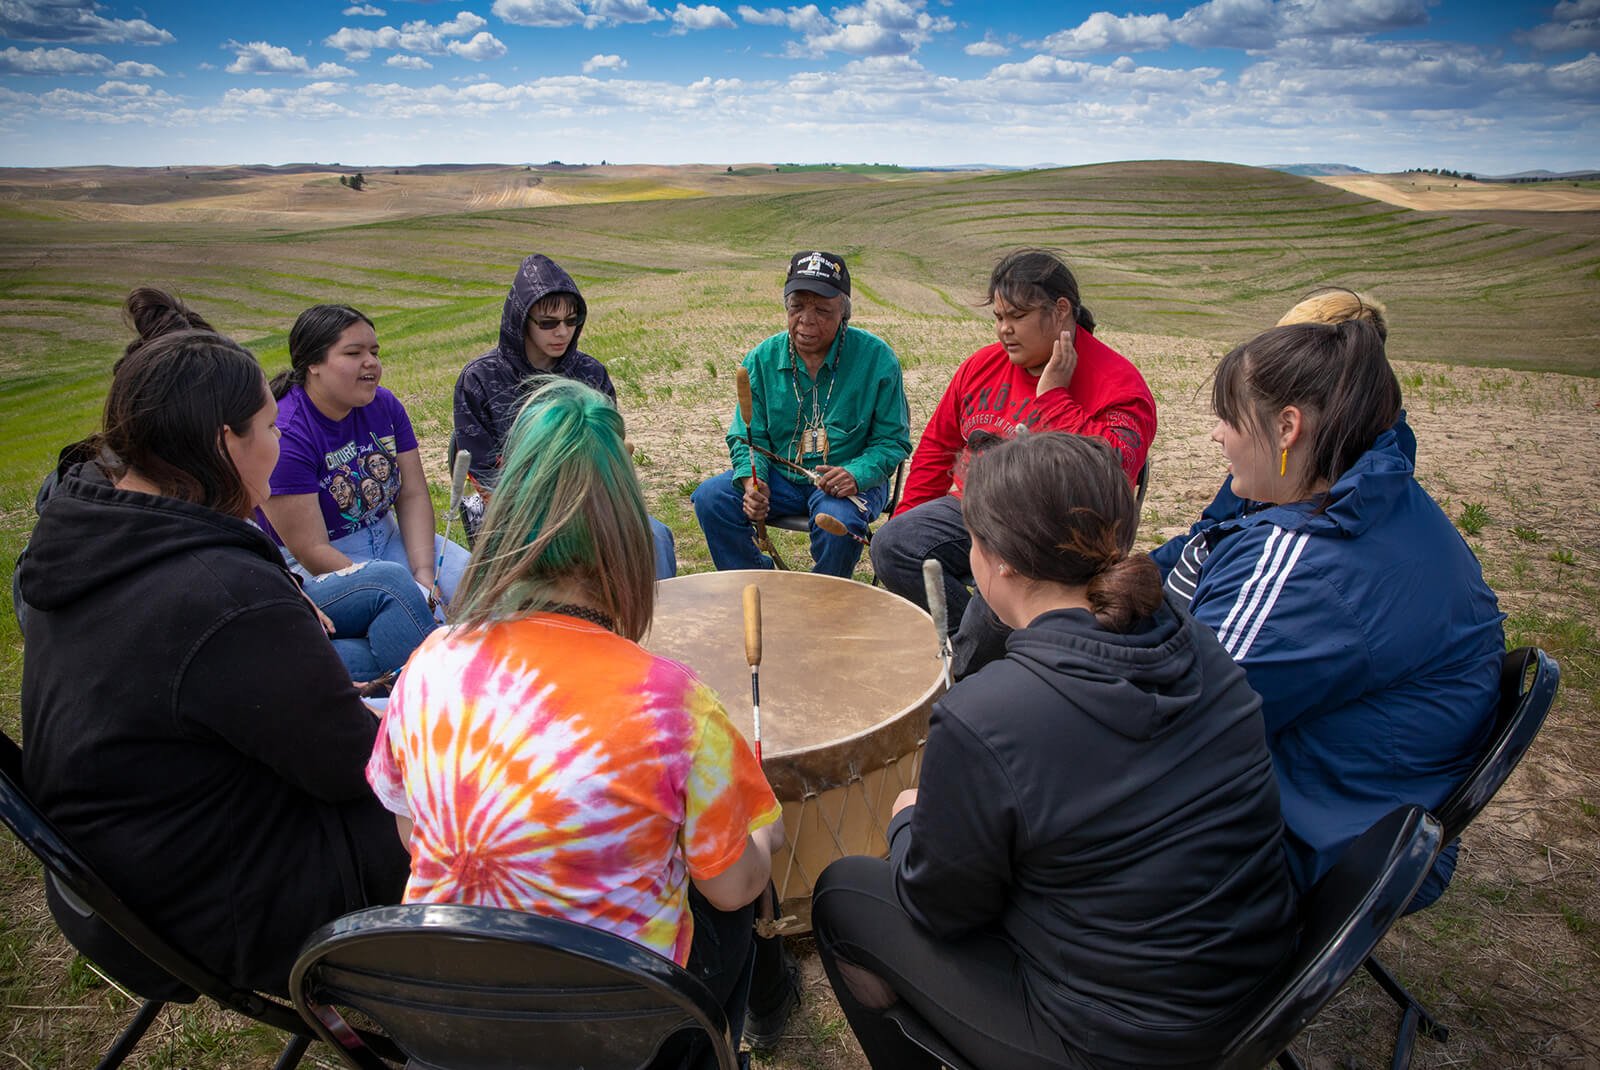 Members of the drum circle gather around the drum on the edge of the prairie